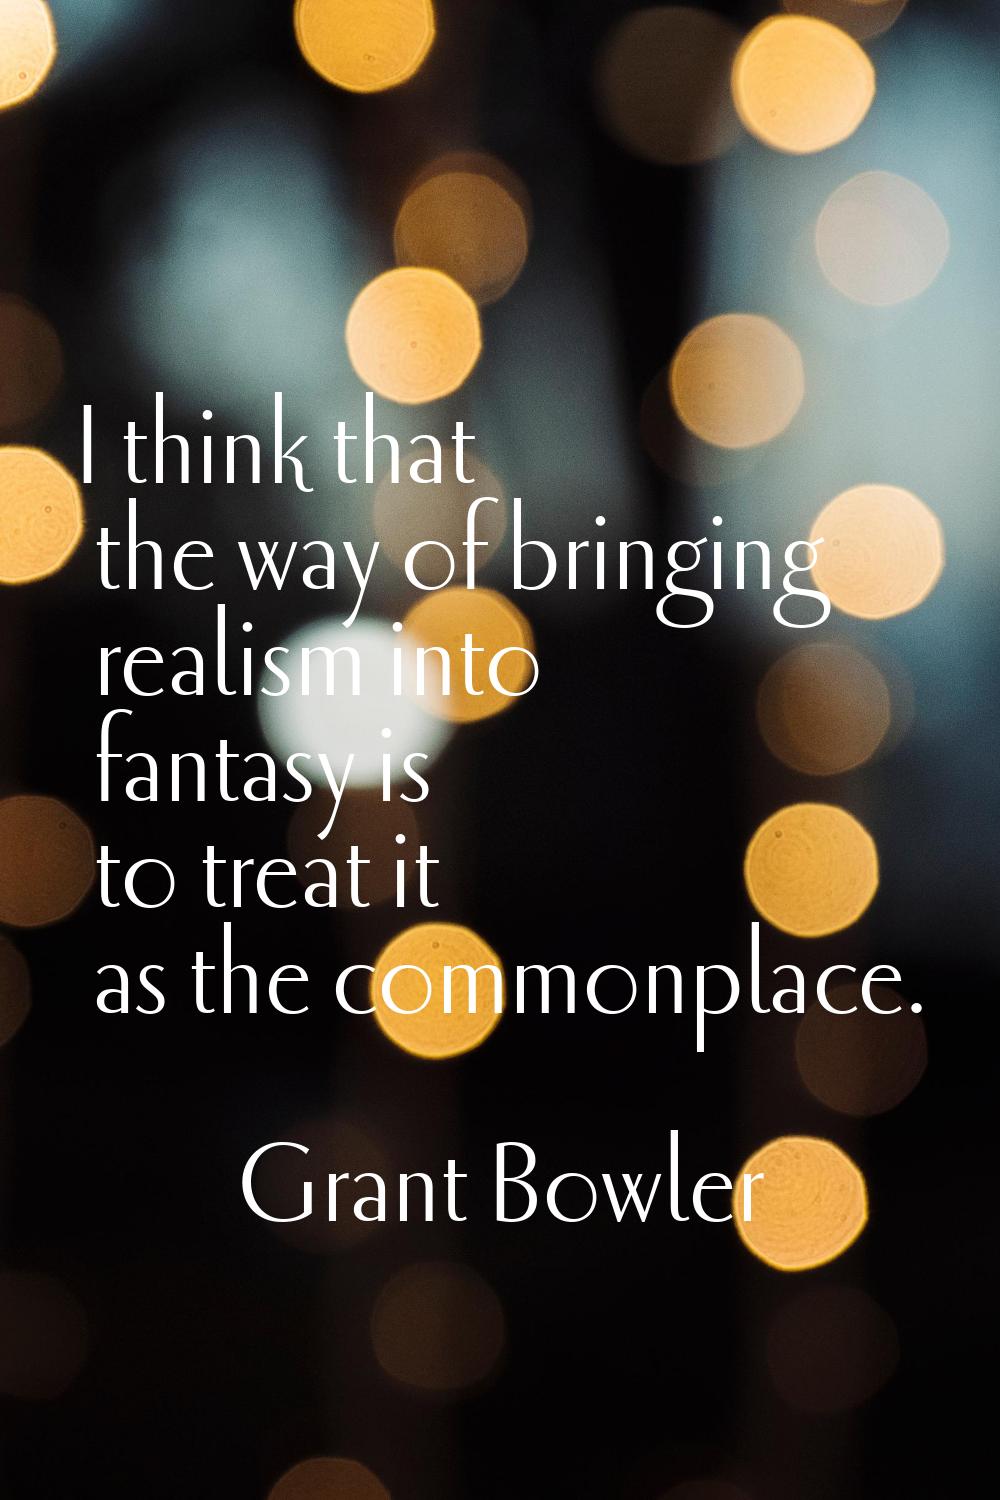 I think that the way of bringing realism into fantasy is to treat it as the commonplace.